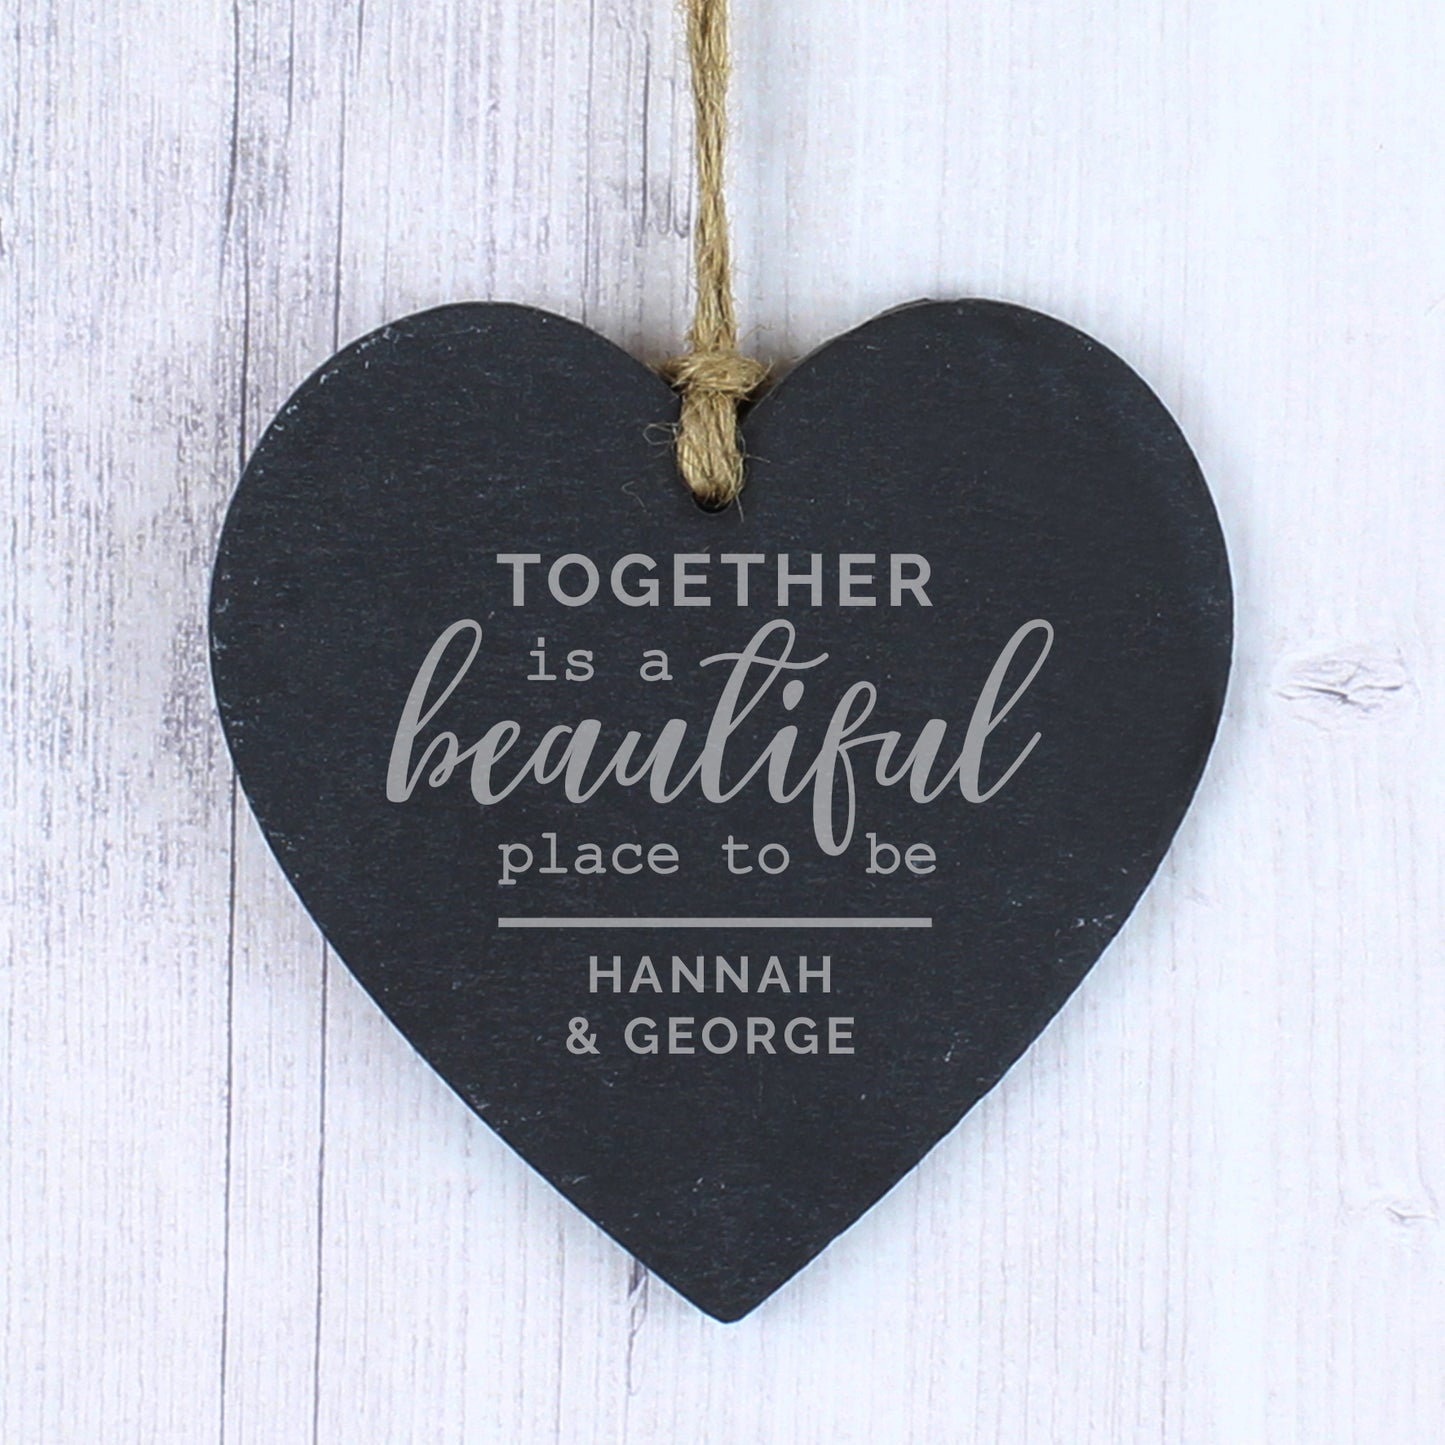 Personalised Slate Heart Hanger - Together Is A Beautiful Place To Be - Violet Belle Gifts - Personalised Slate Heart Hanger